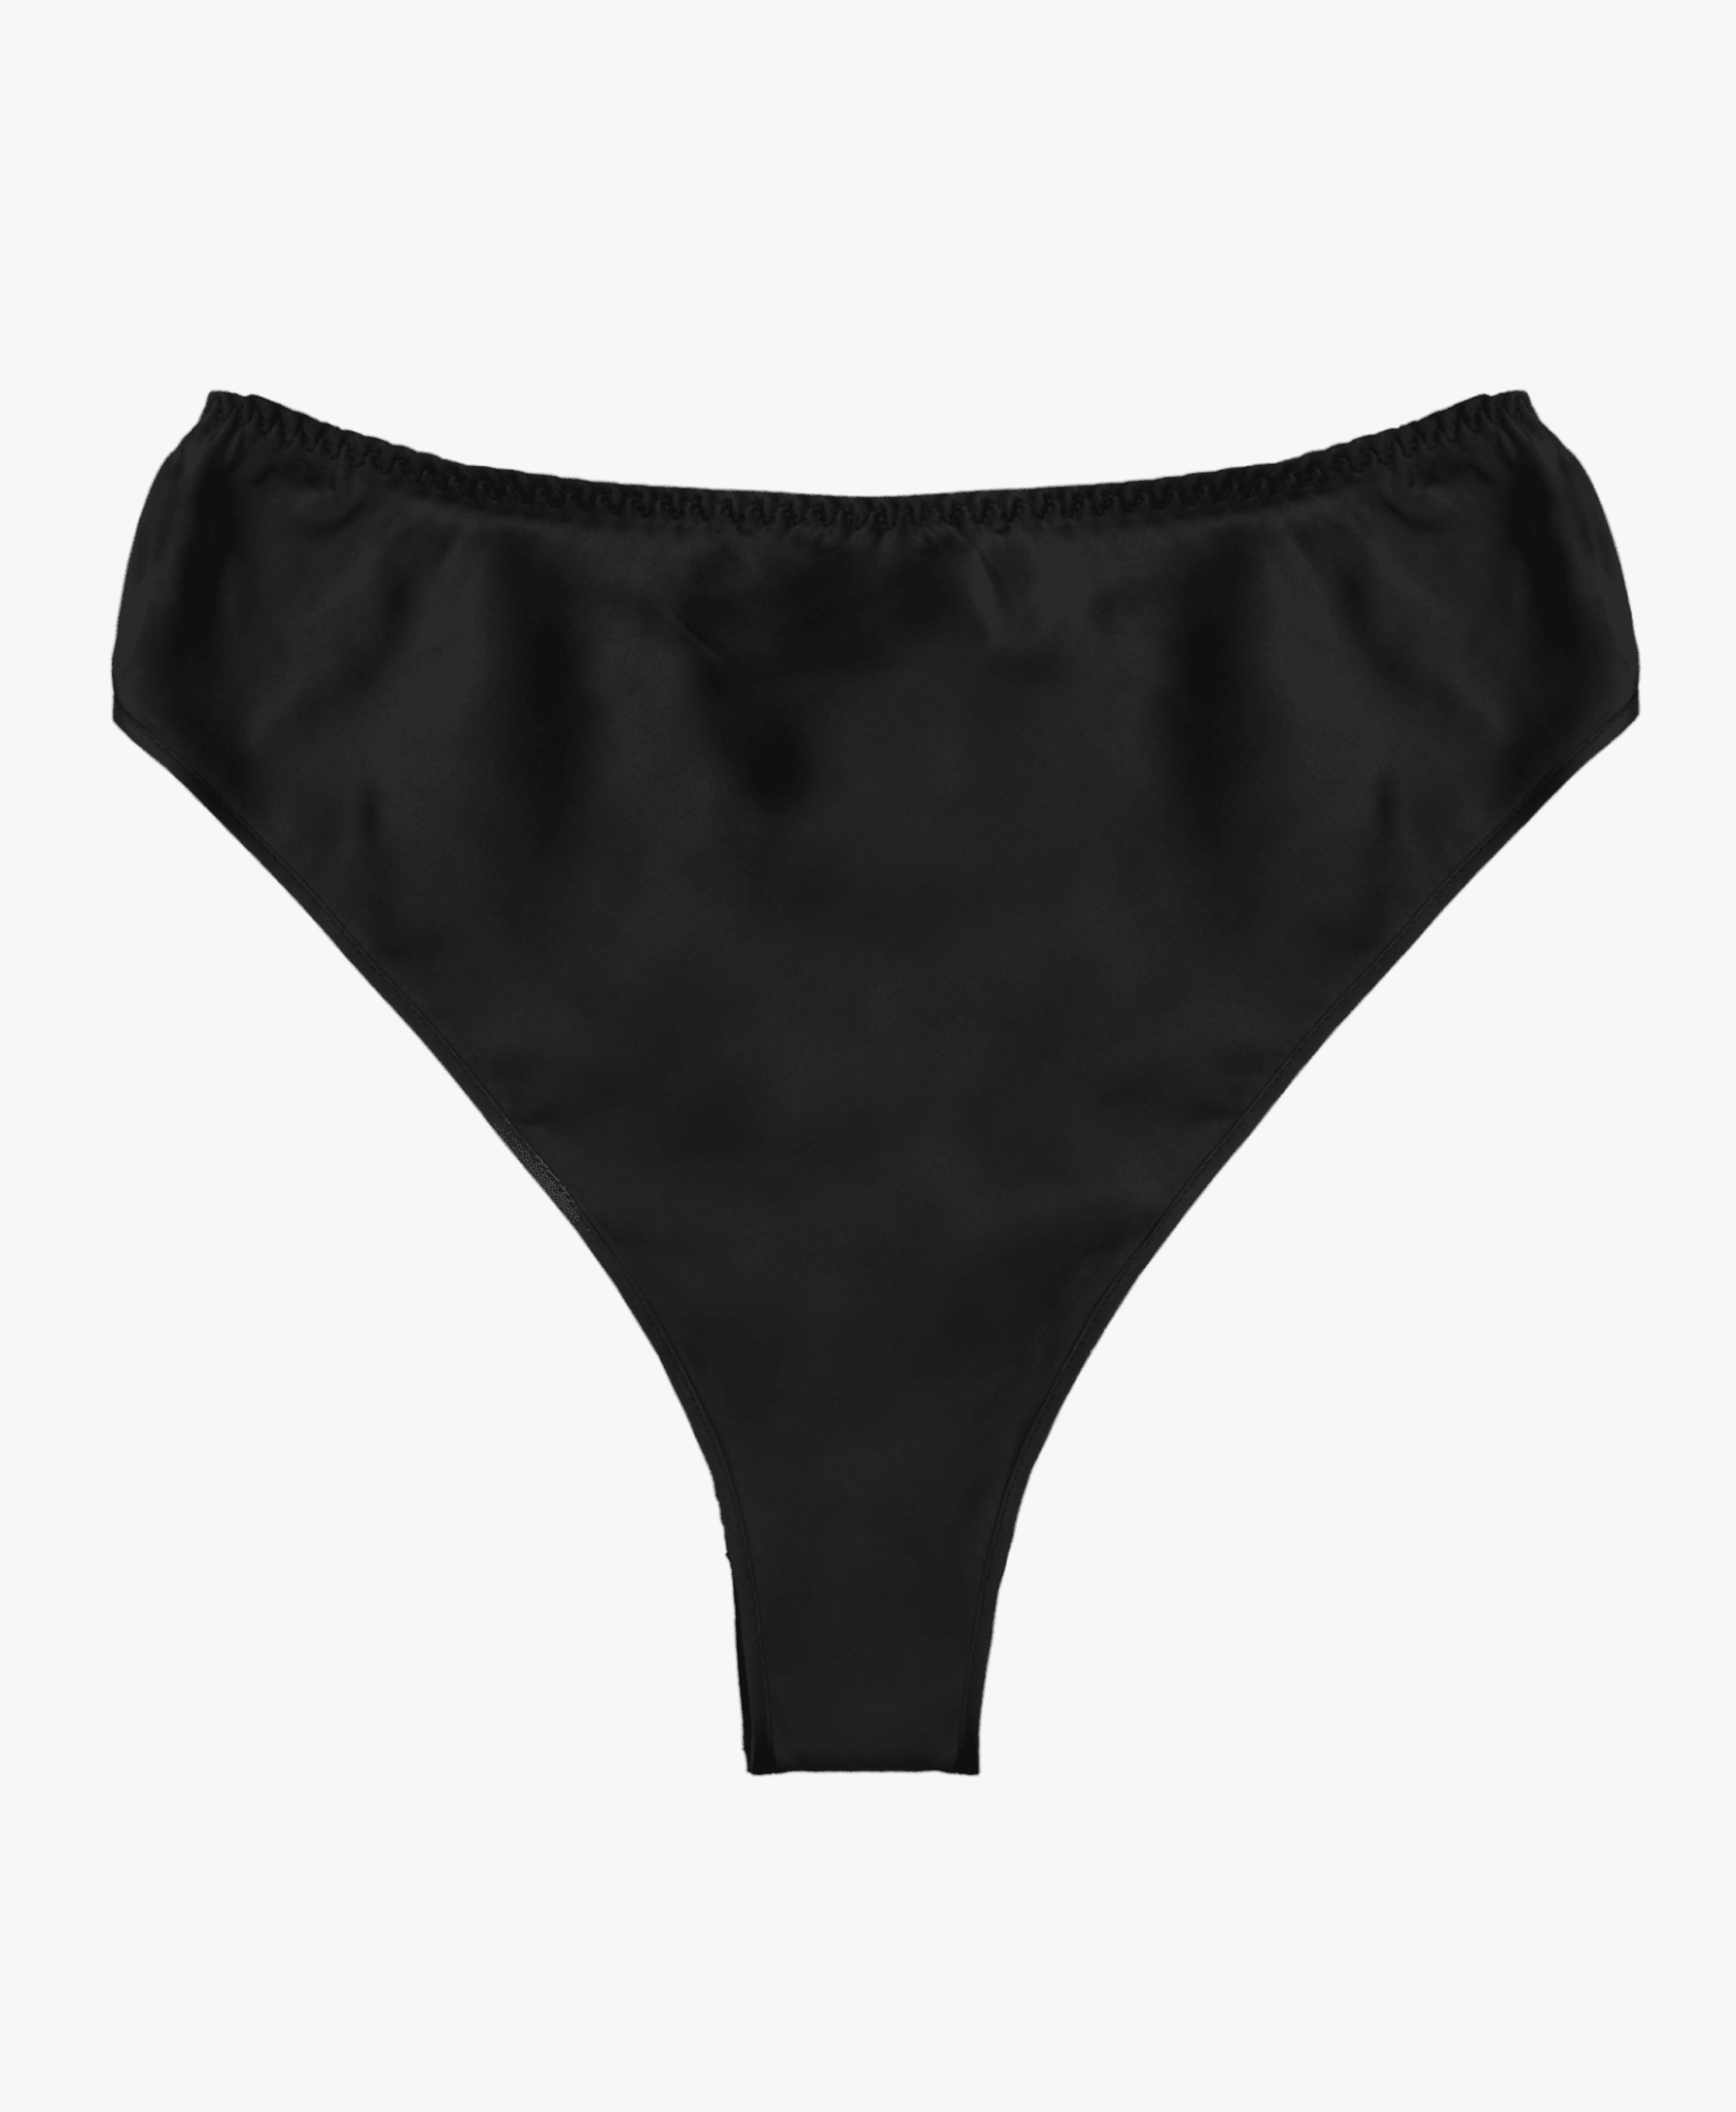 Shop THEA: HIGH-WAISTED PANTIES IN GOTS ORGANIC SILK from HERTH at Seezona